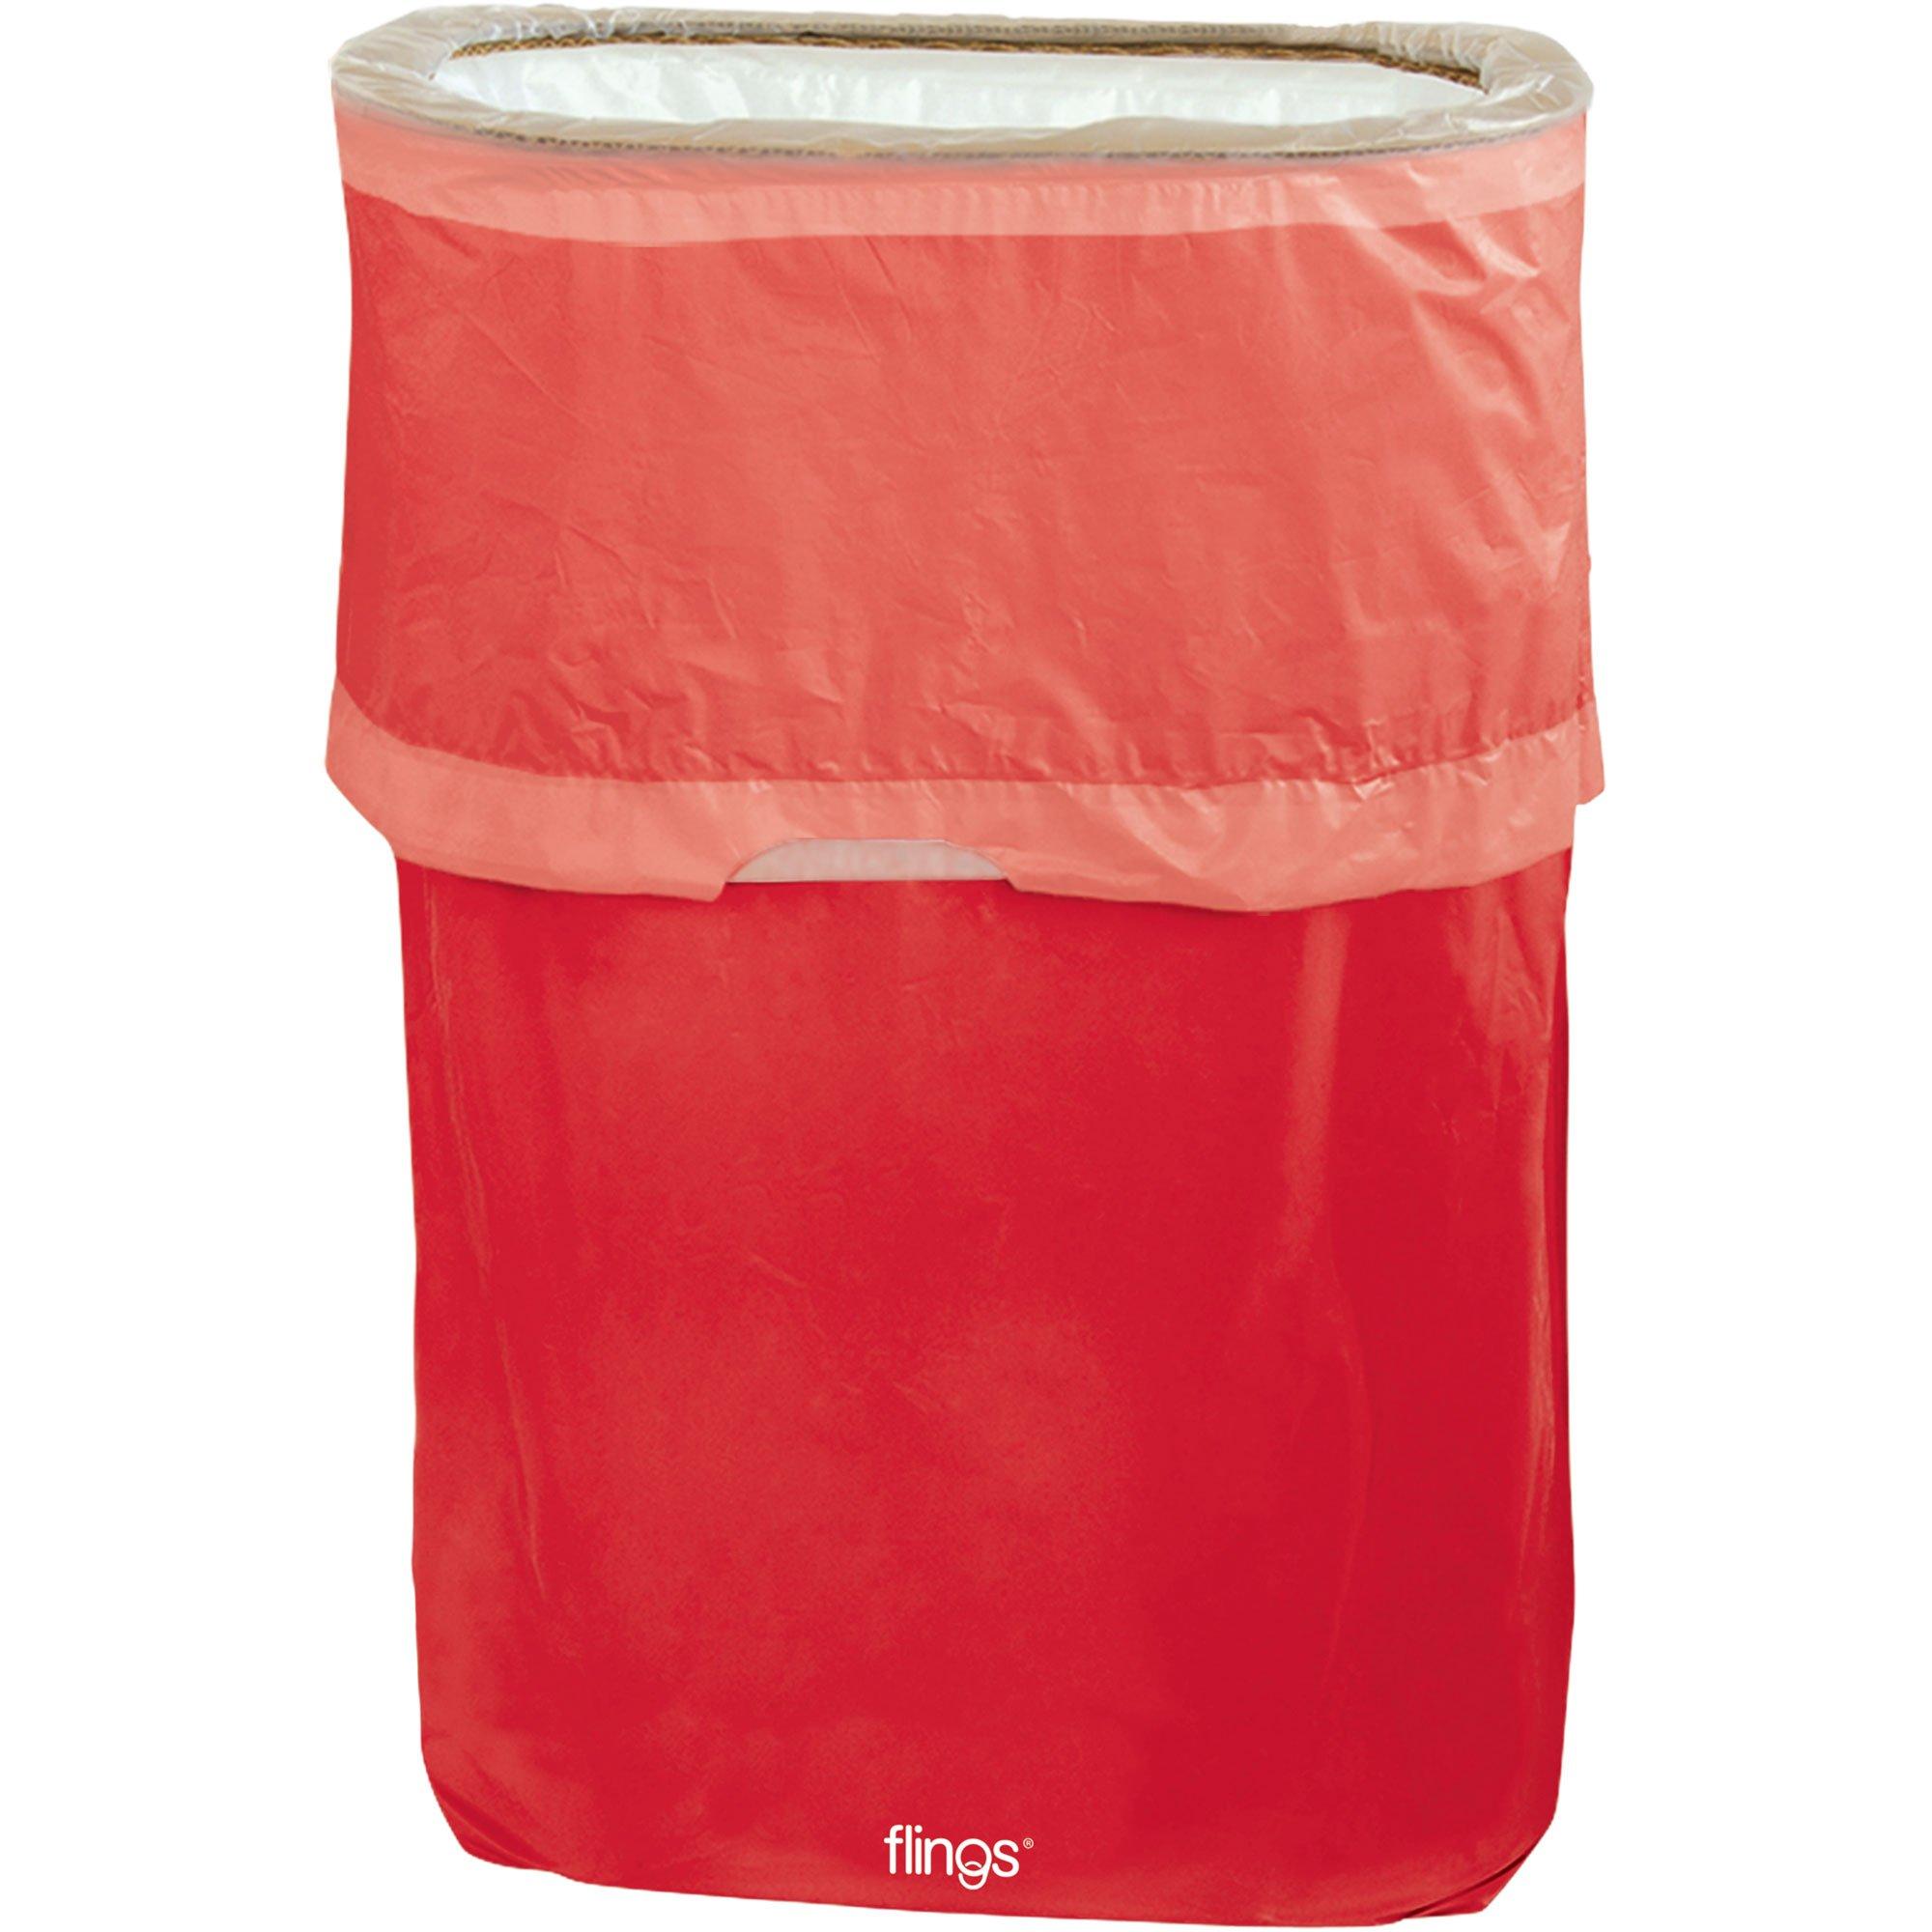 33-Gallon Outdoor Pop-Up Garbage Can - Collapsible Trash Can and